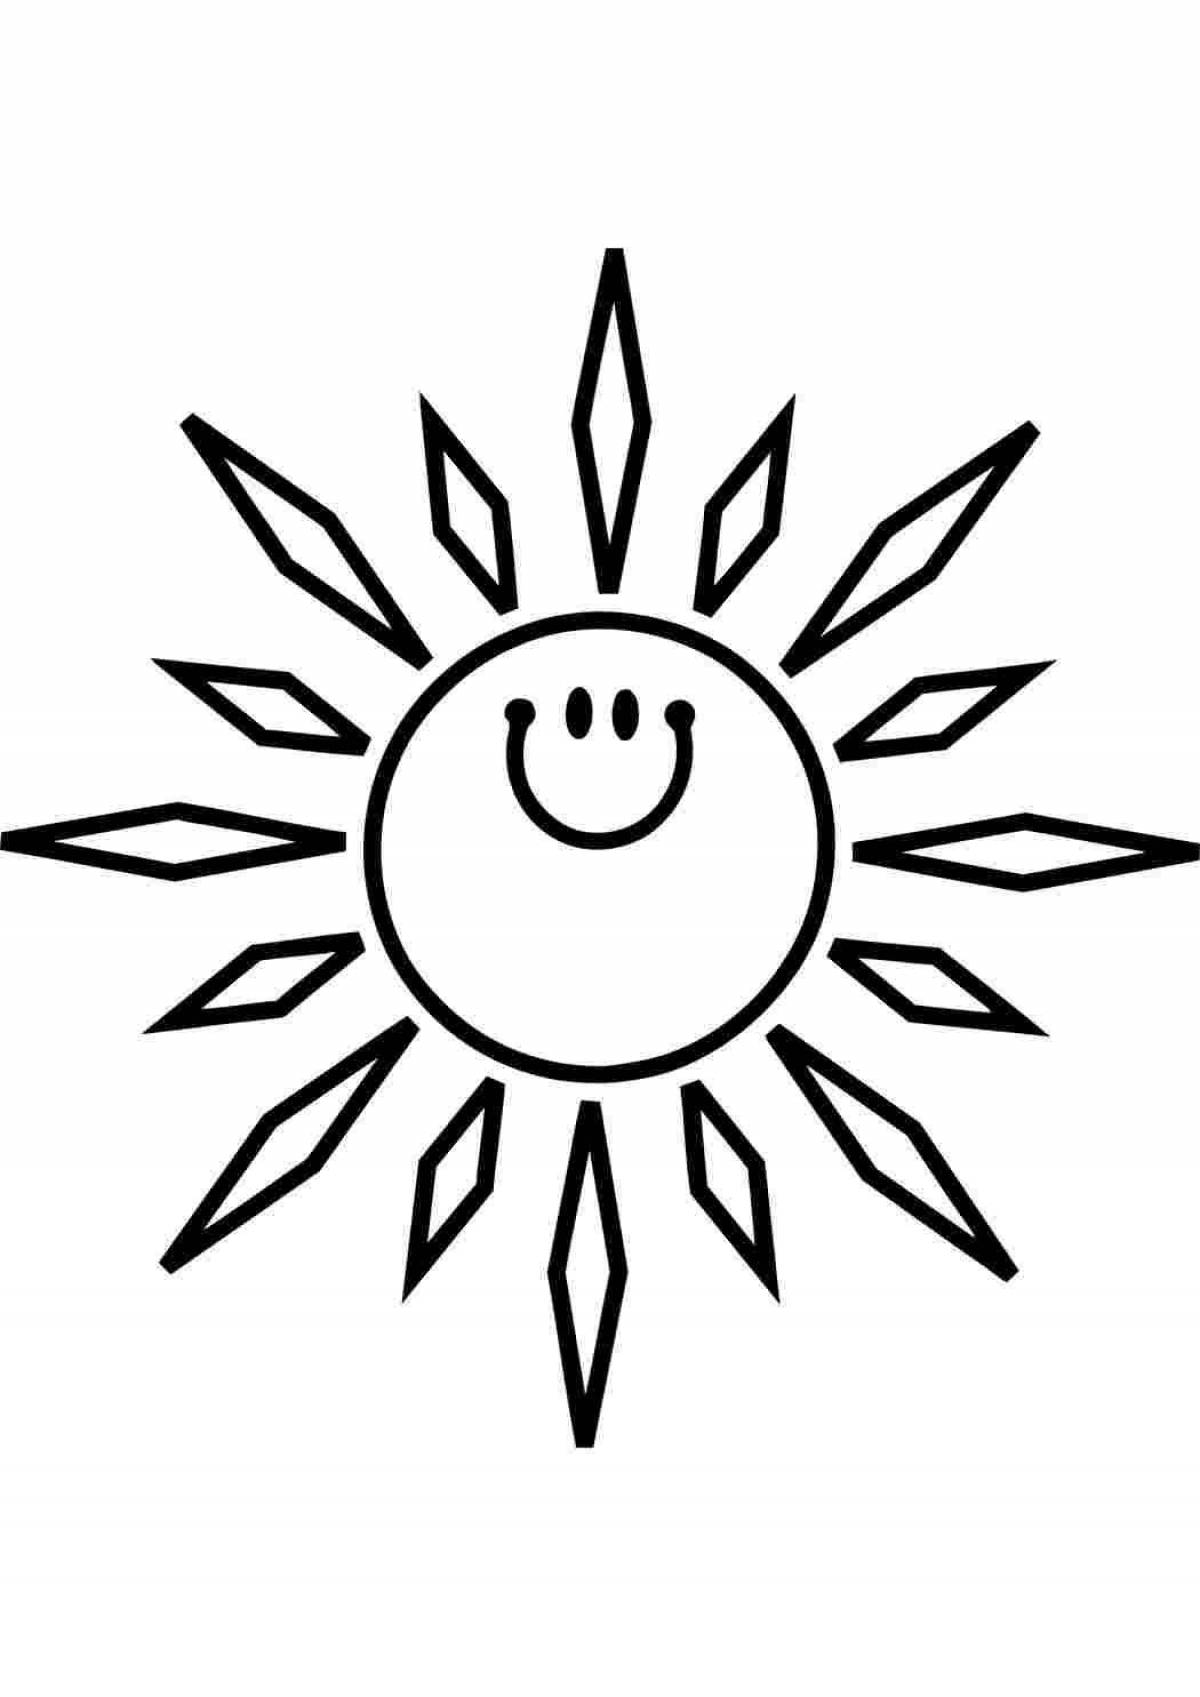 Sun coloring for children 3-4 years old